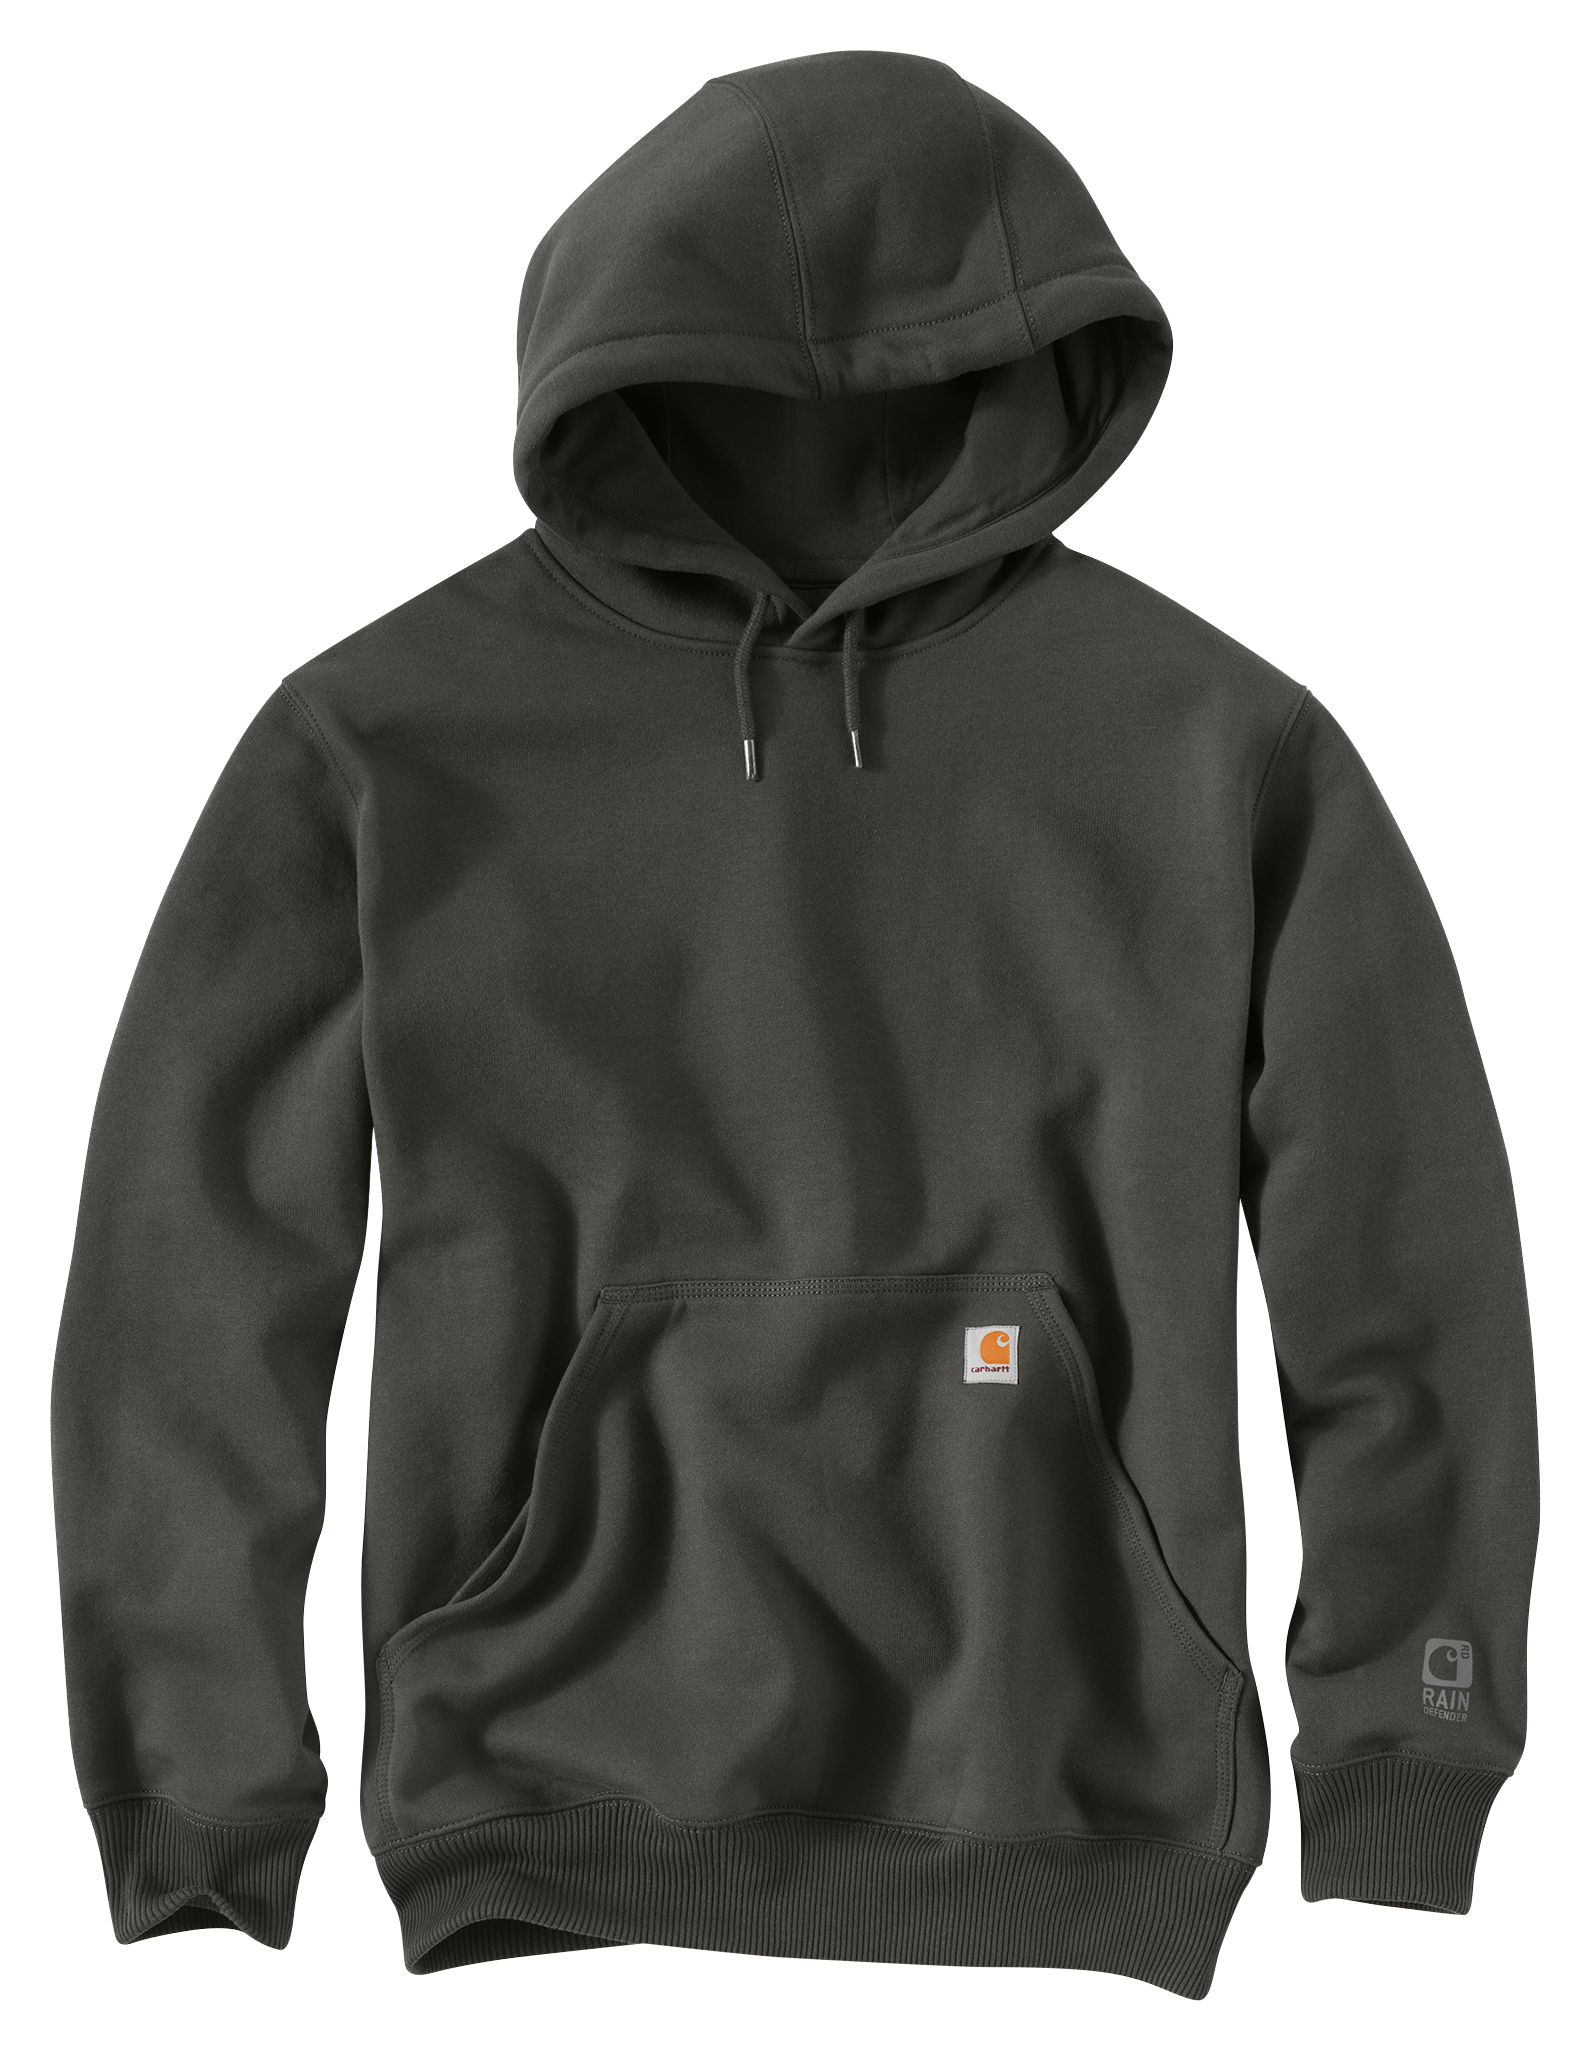 Cabela's Game Day Long-Sleeve Hoodie for Men